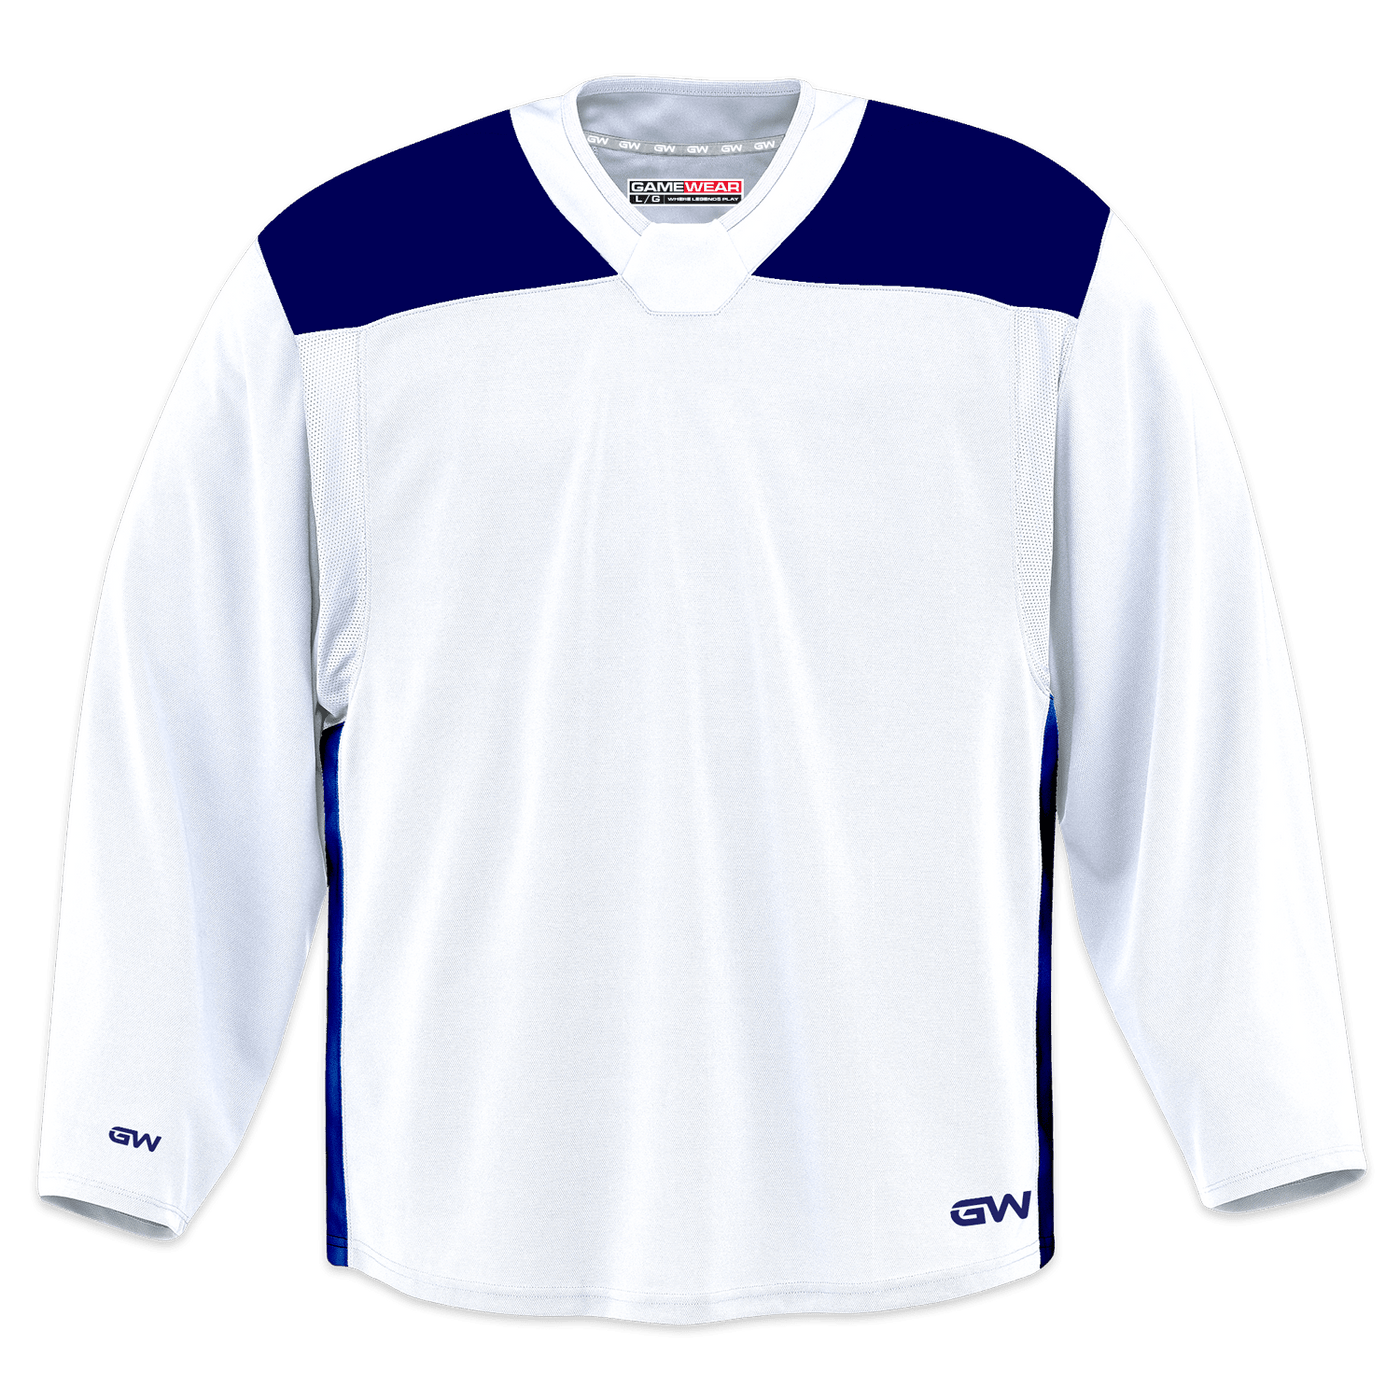 GameWear GW6500 ProLite Series Junior Hockey Practice Jersey - White / Royal - The Hockey Shop Source For Sports